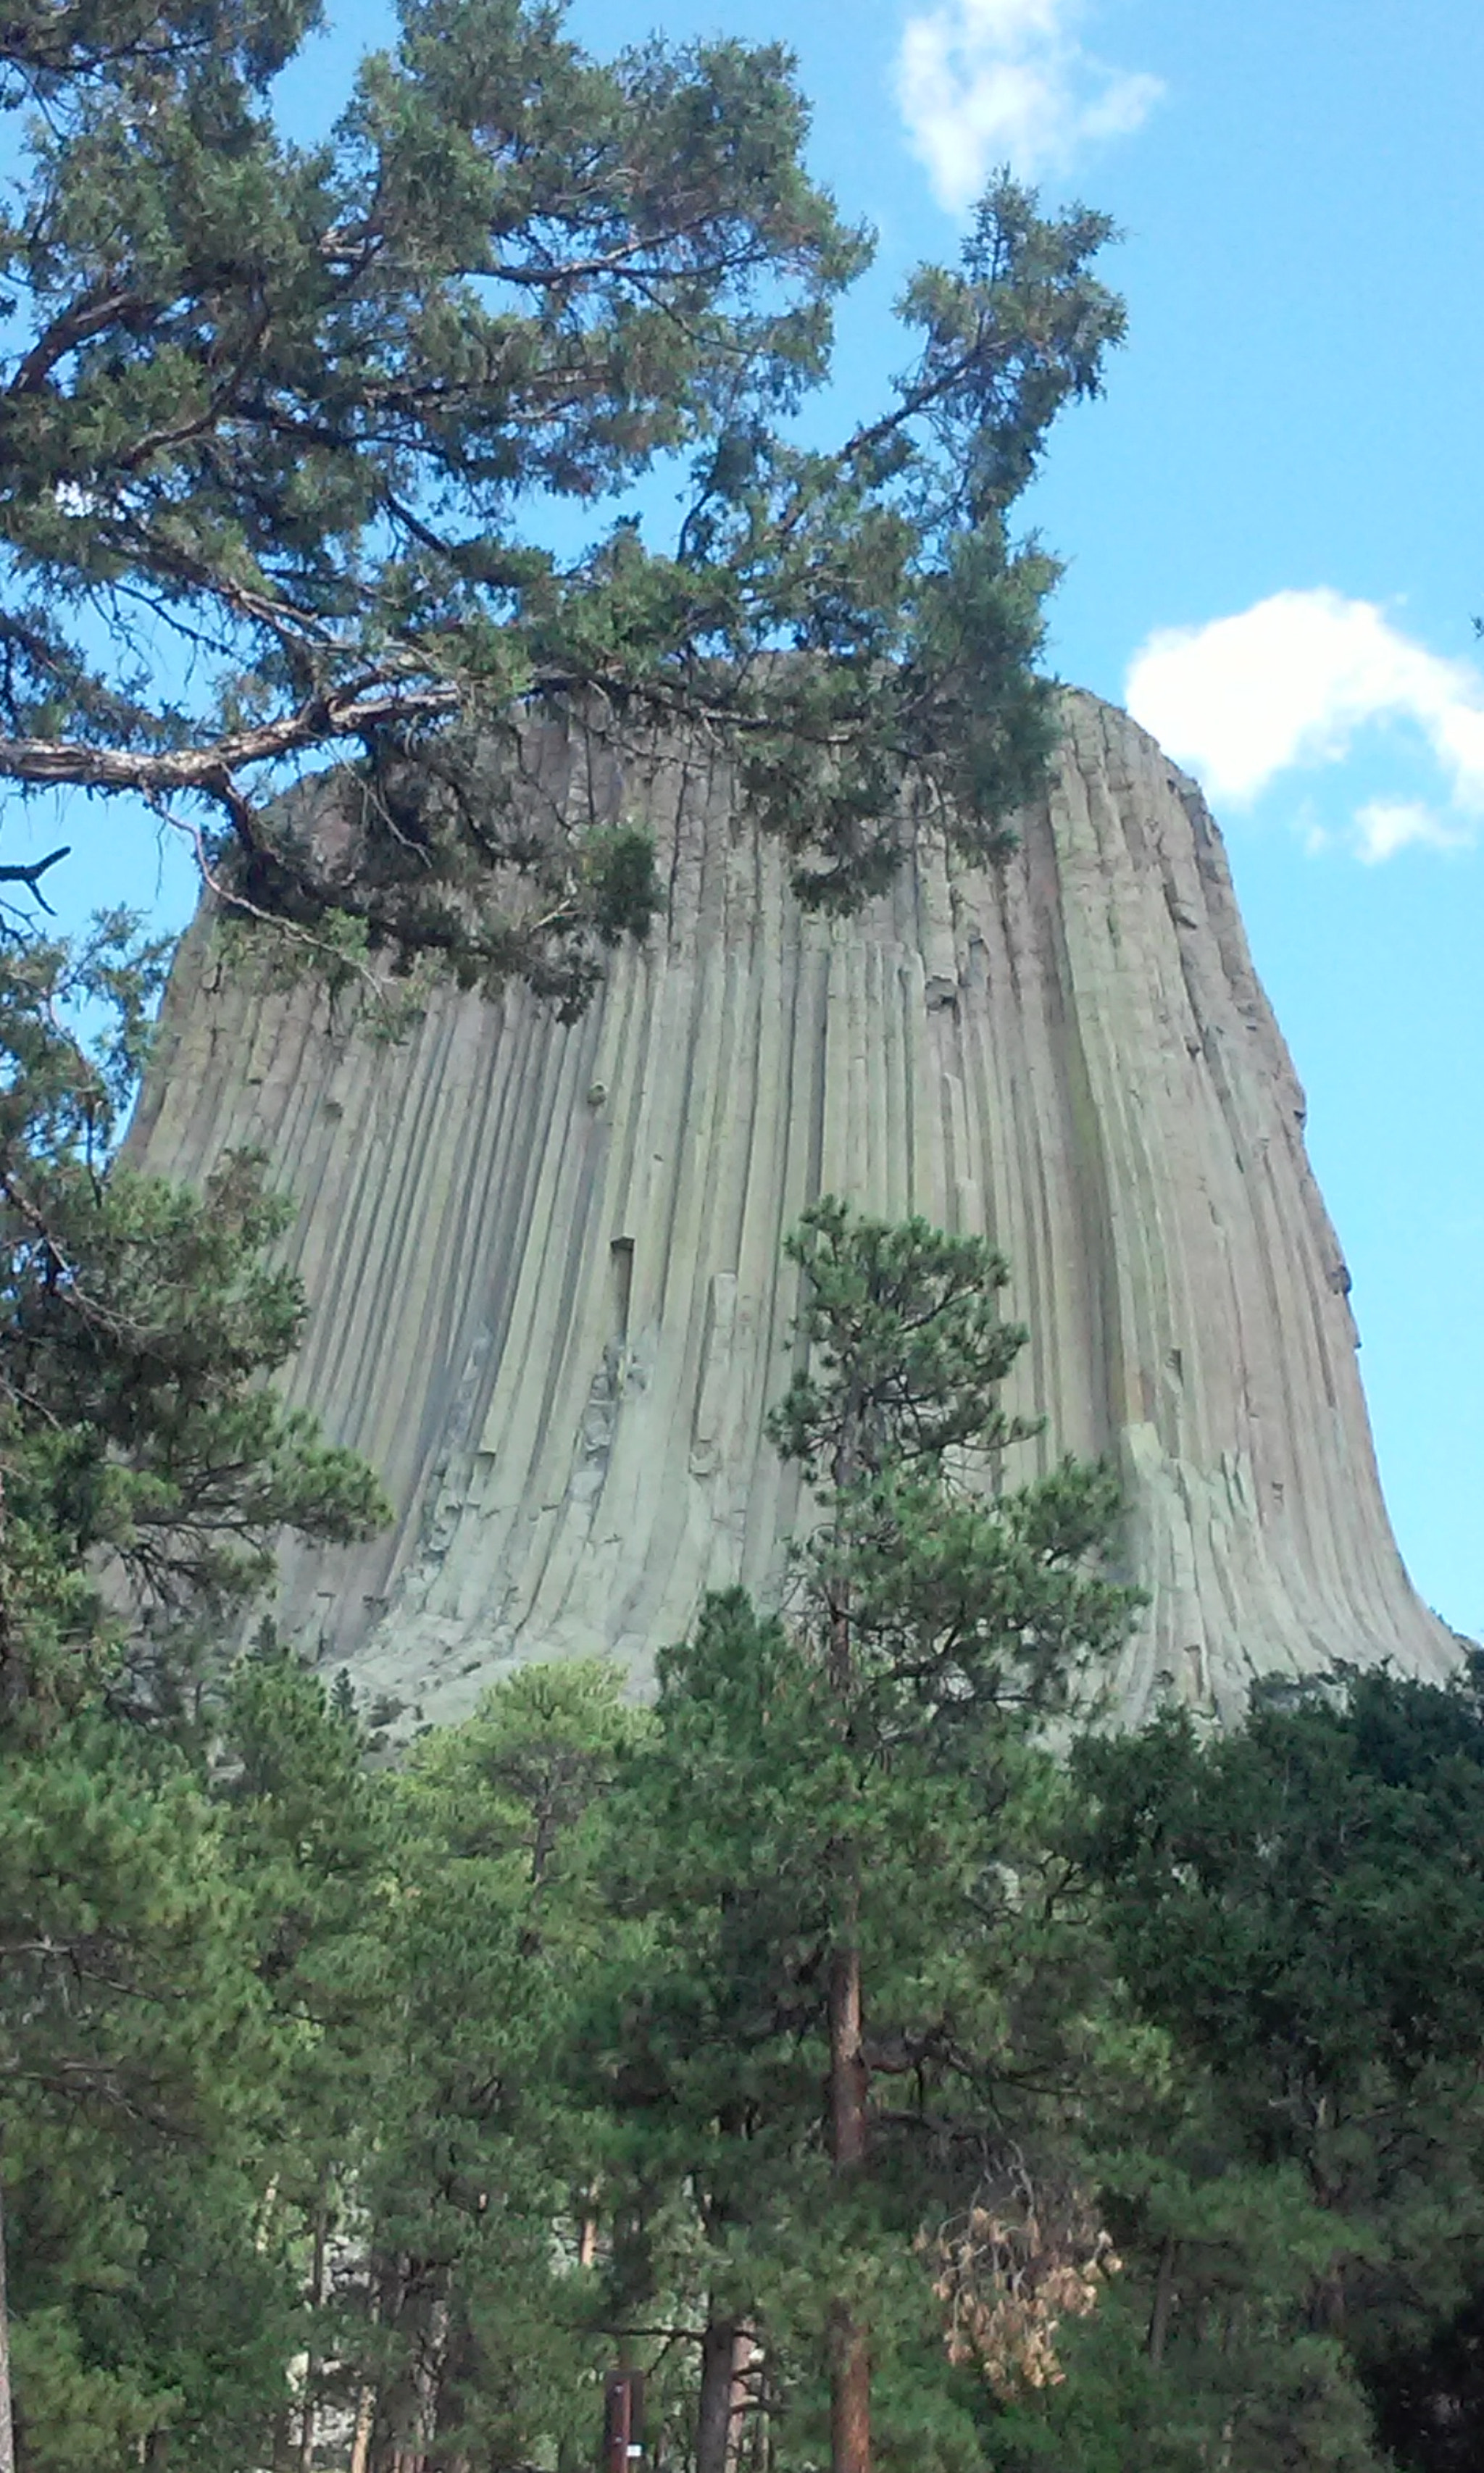 LG Optimus Exceed 2 sample photo. Devil's tower photography